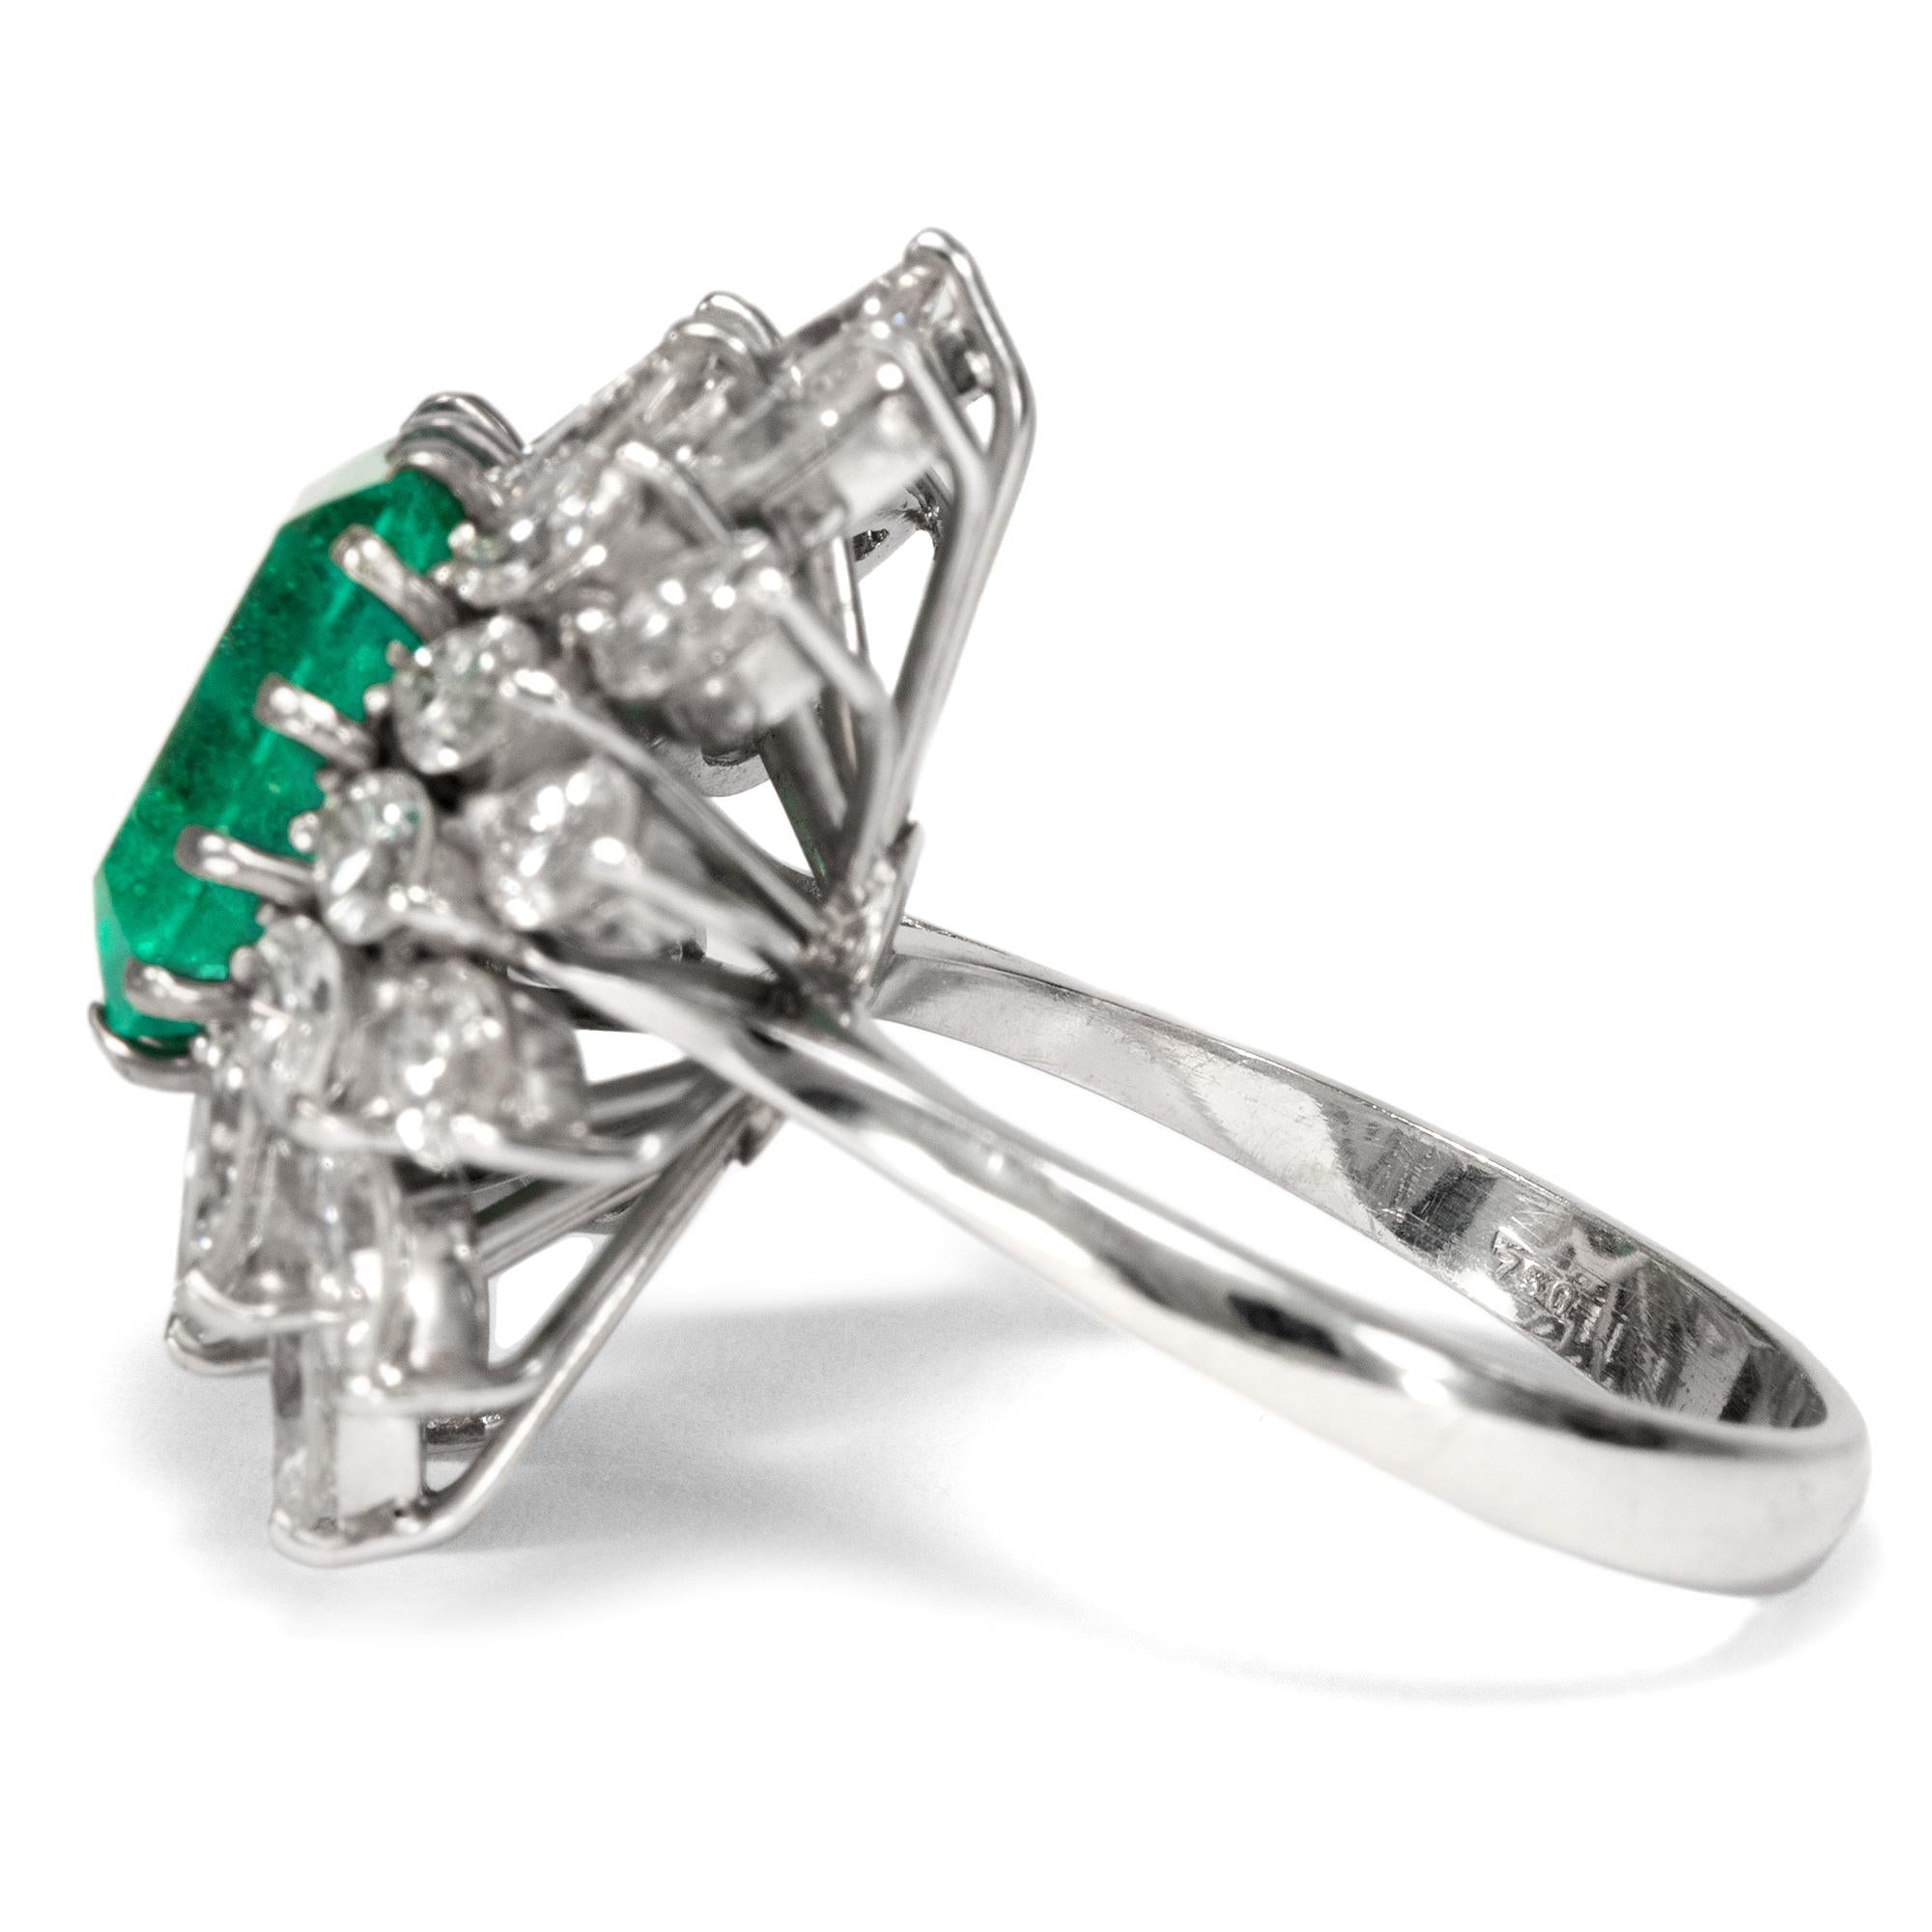 Emerald Cut Vintage circa 1970 Certified 3.62 Carat Emerald and 4.48 Ct Diamond Cluster Ring